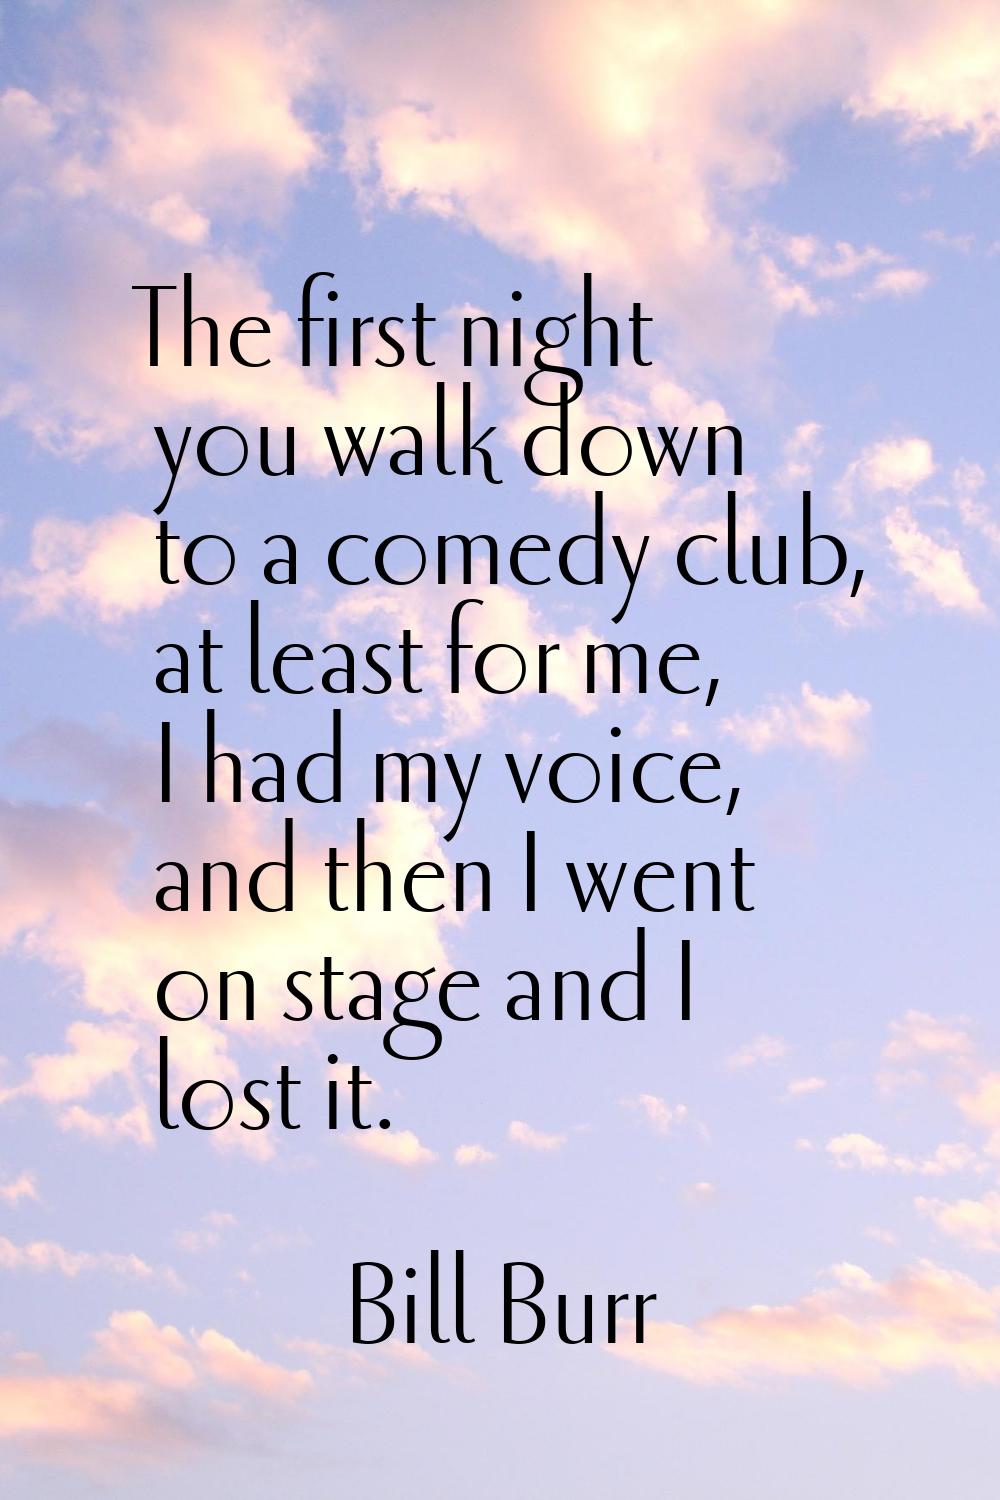 The first night you walk down to a comedy club, at least for me, I had my voice, and then I went on